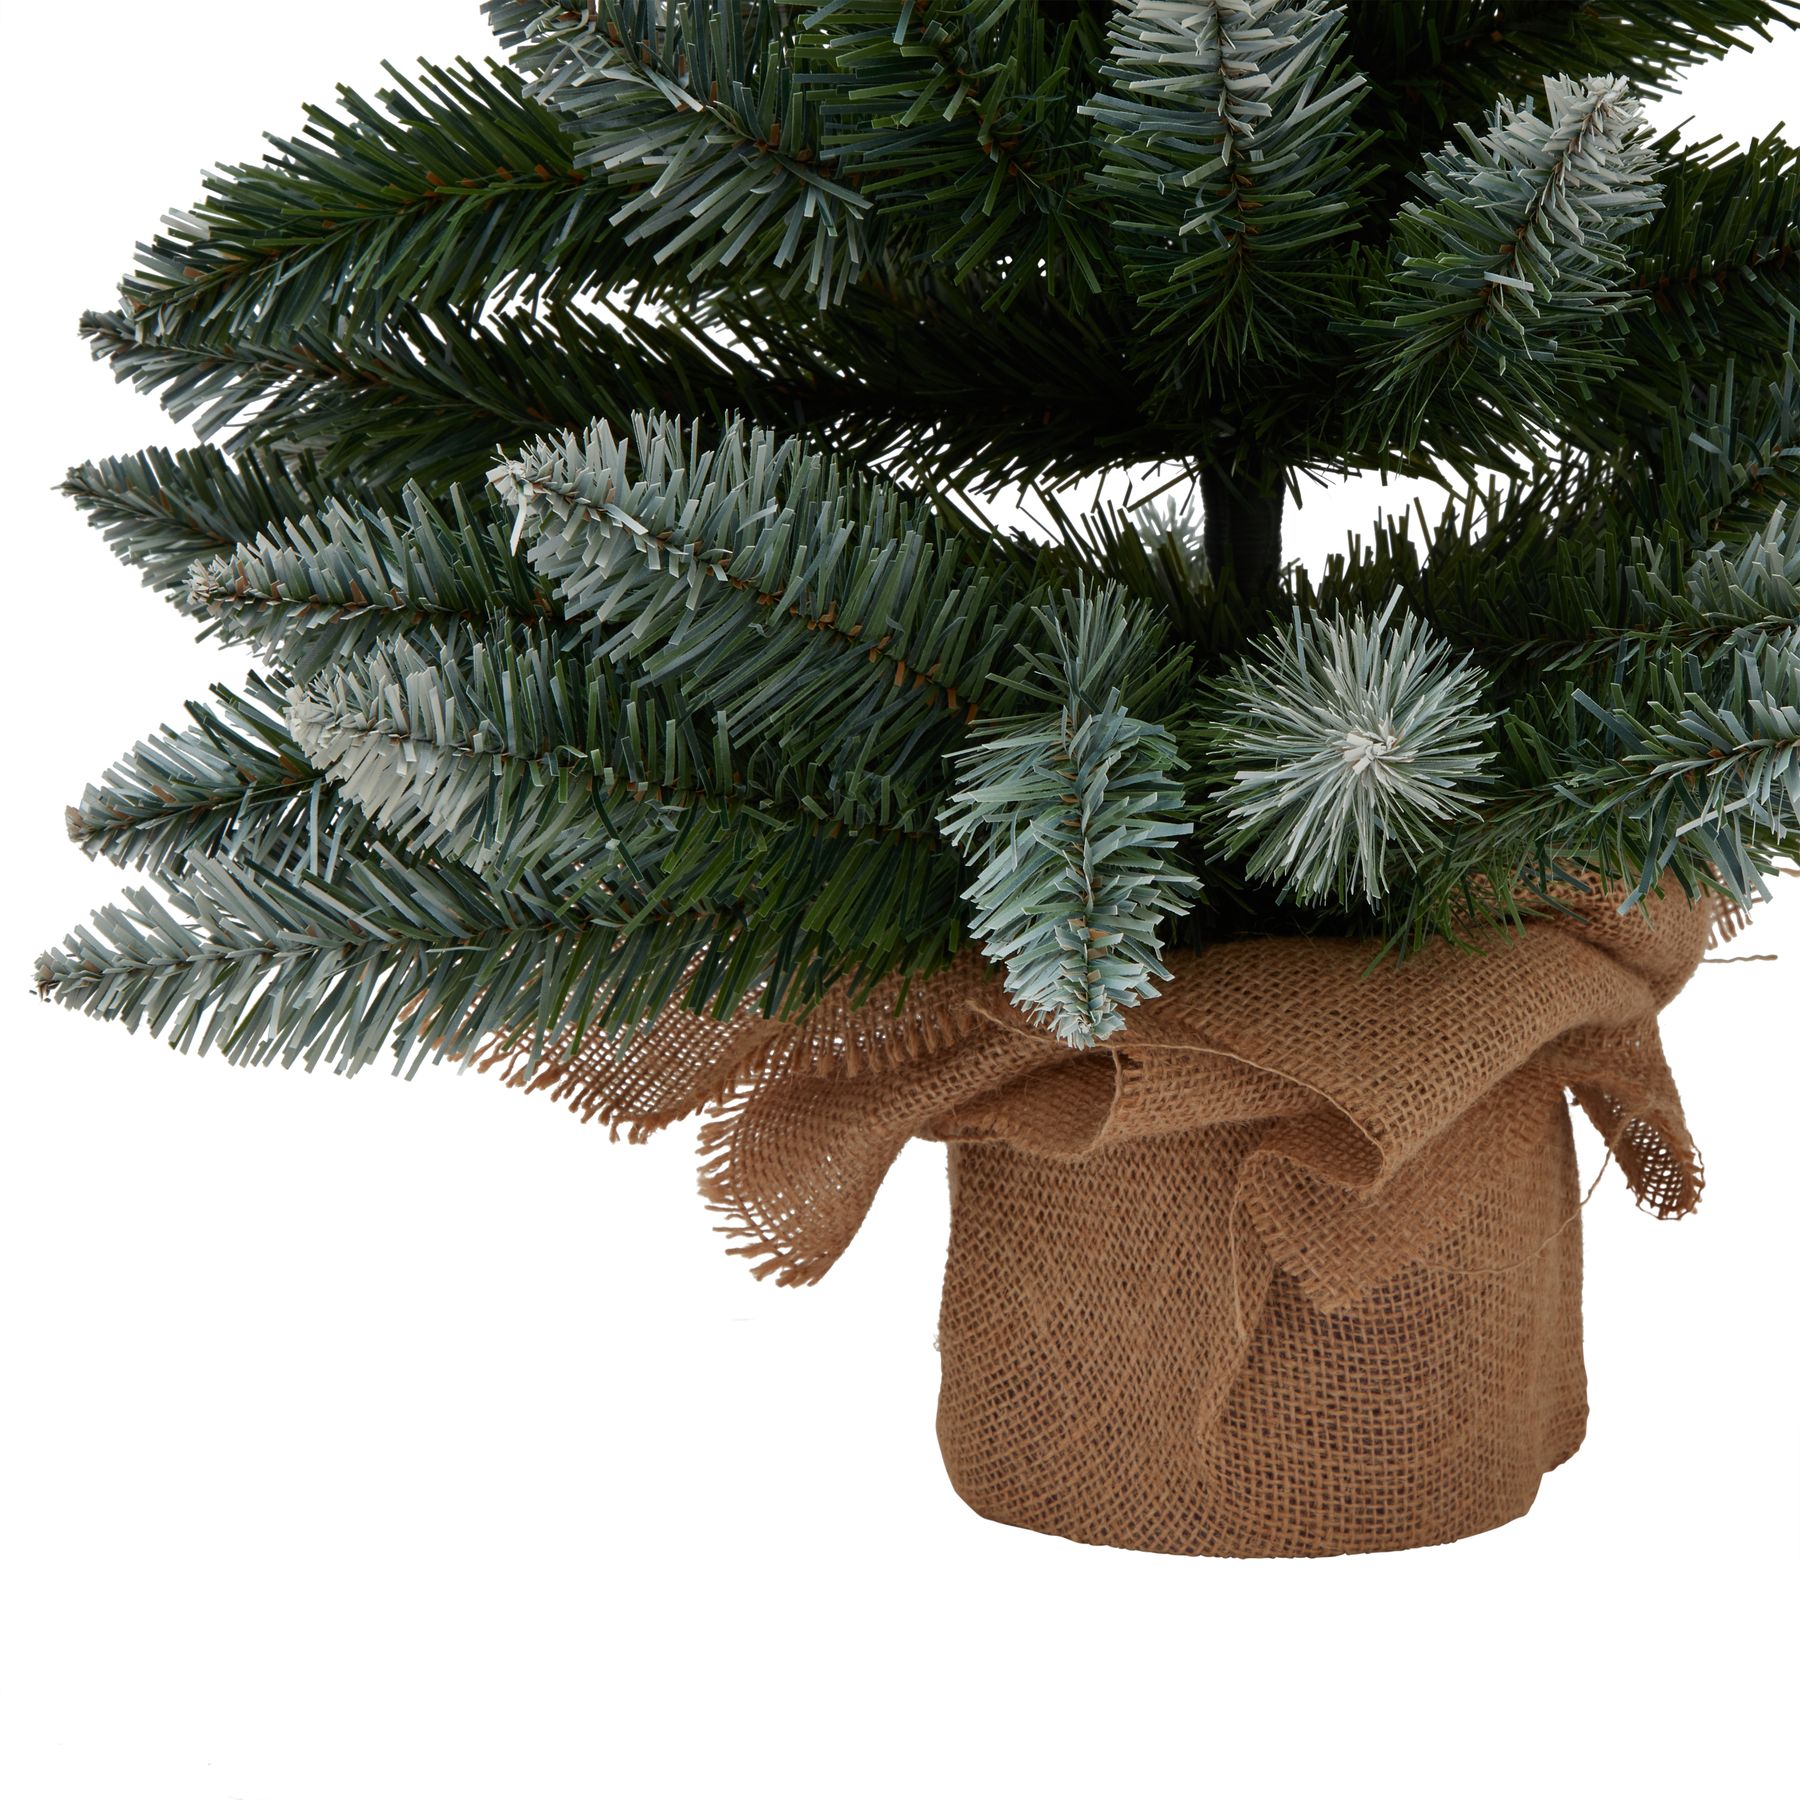 Large Snowy Conifer Tree In Hessian Wrap - Image 3